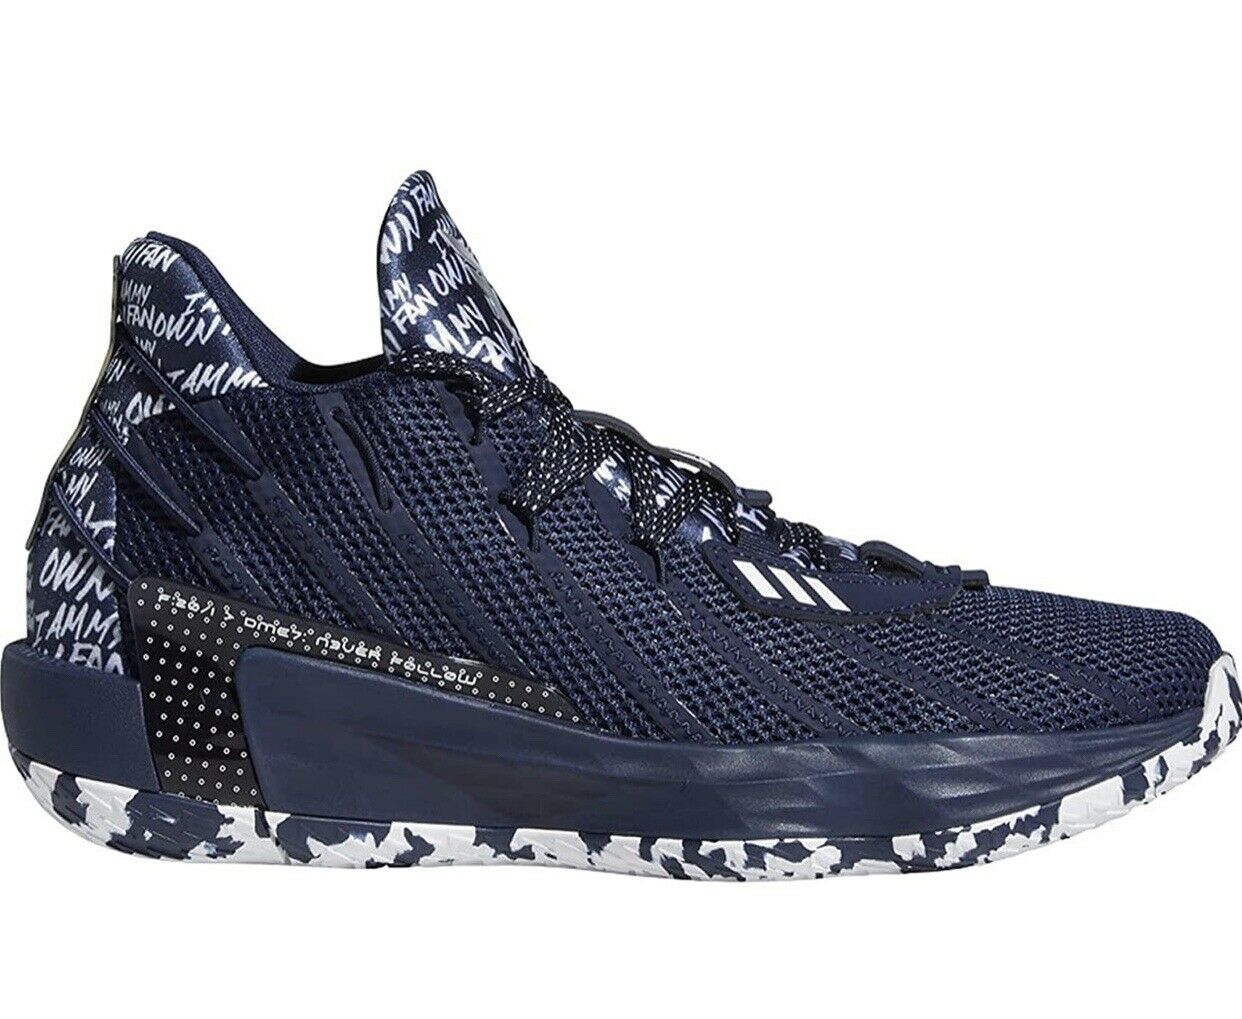 FY0162 Adidas Dame 7 I Am My Own Fan Youth Size 6 (women’s 7.5) Shoes Navy Blue